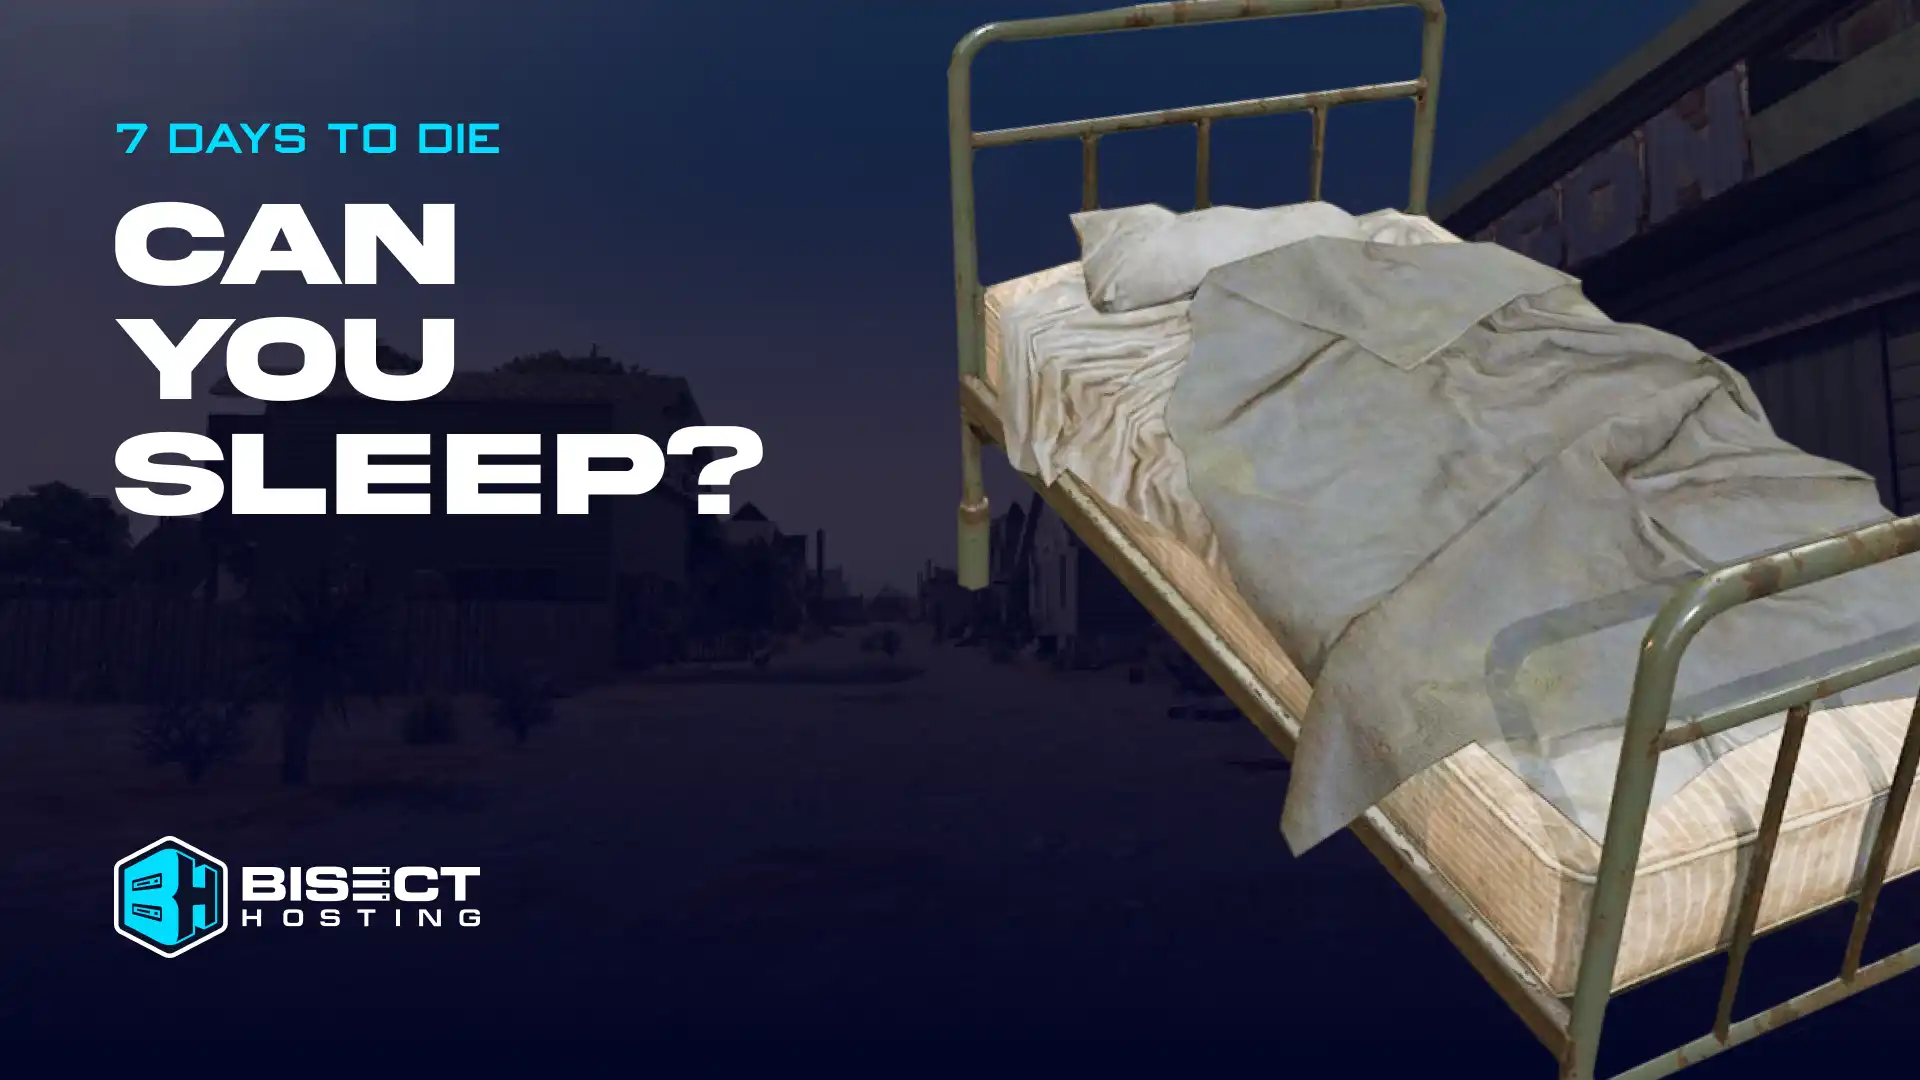 Can You Sleep in 7 Days to Die?